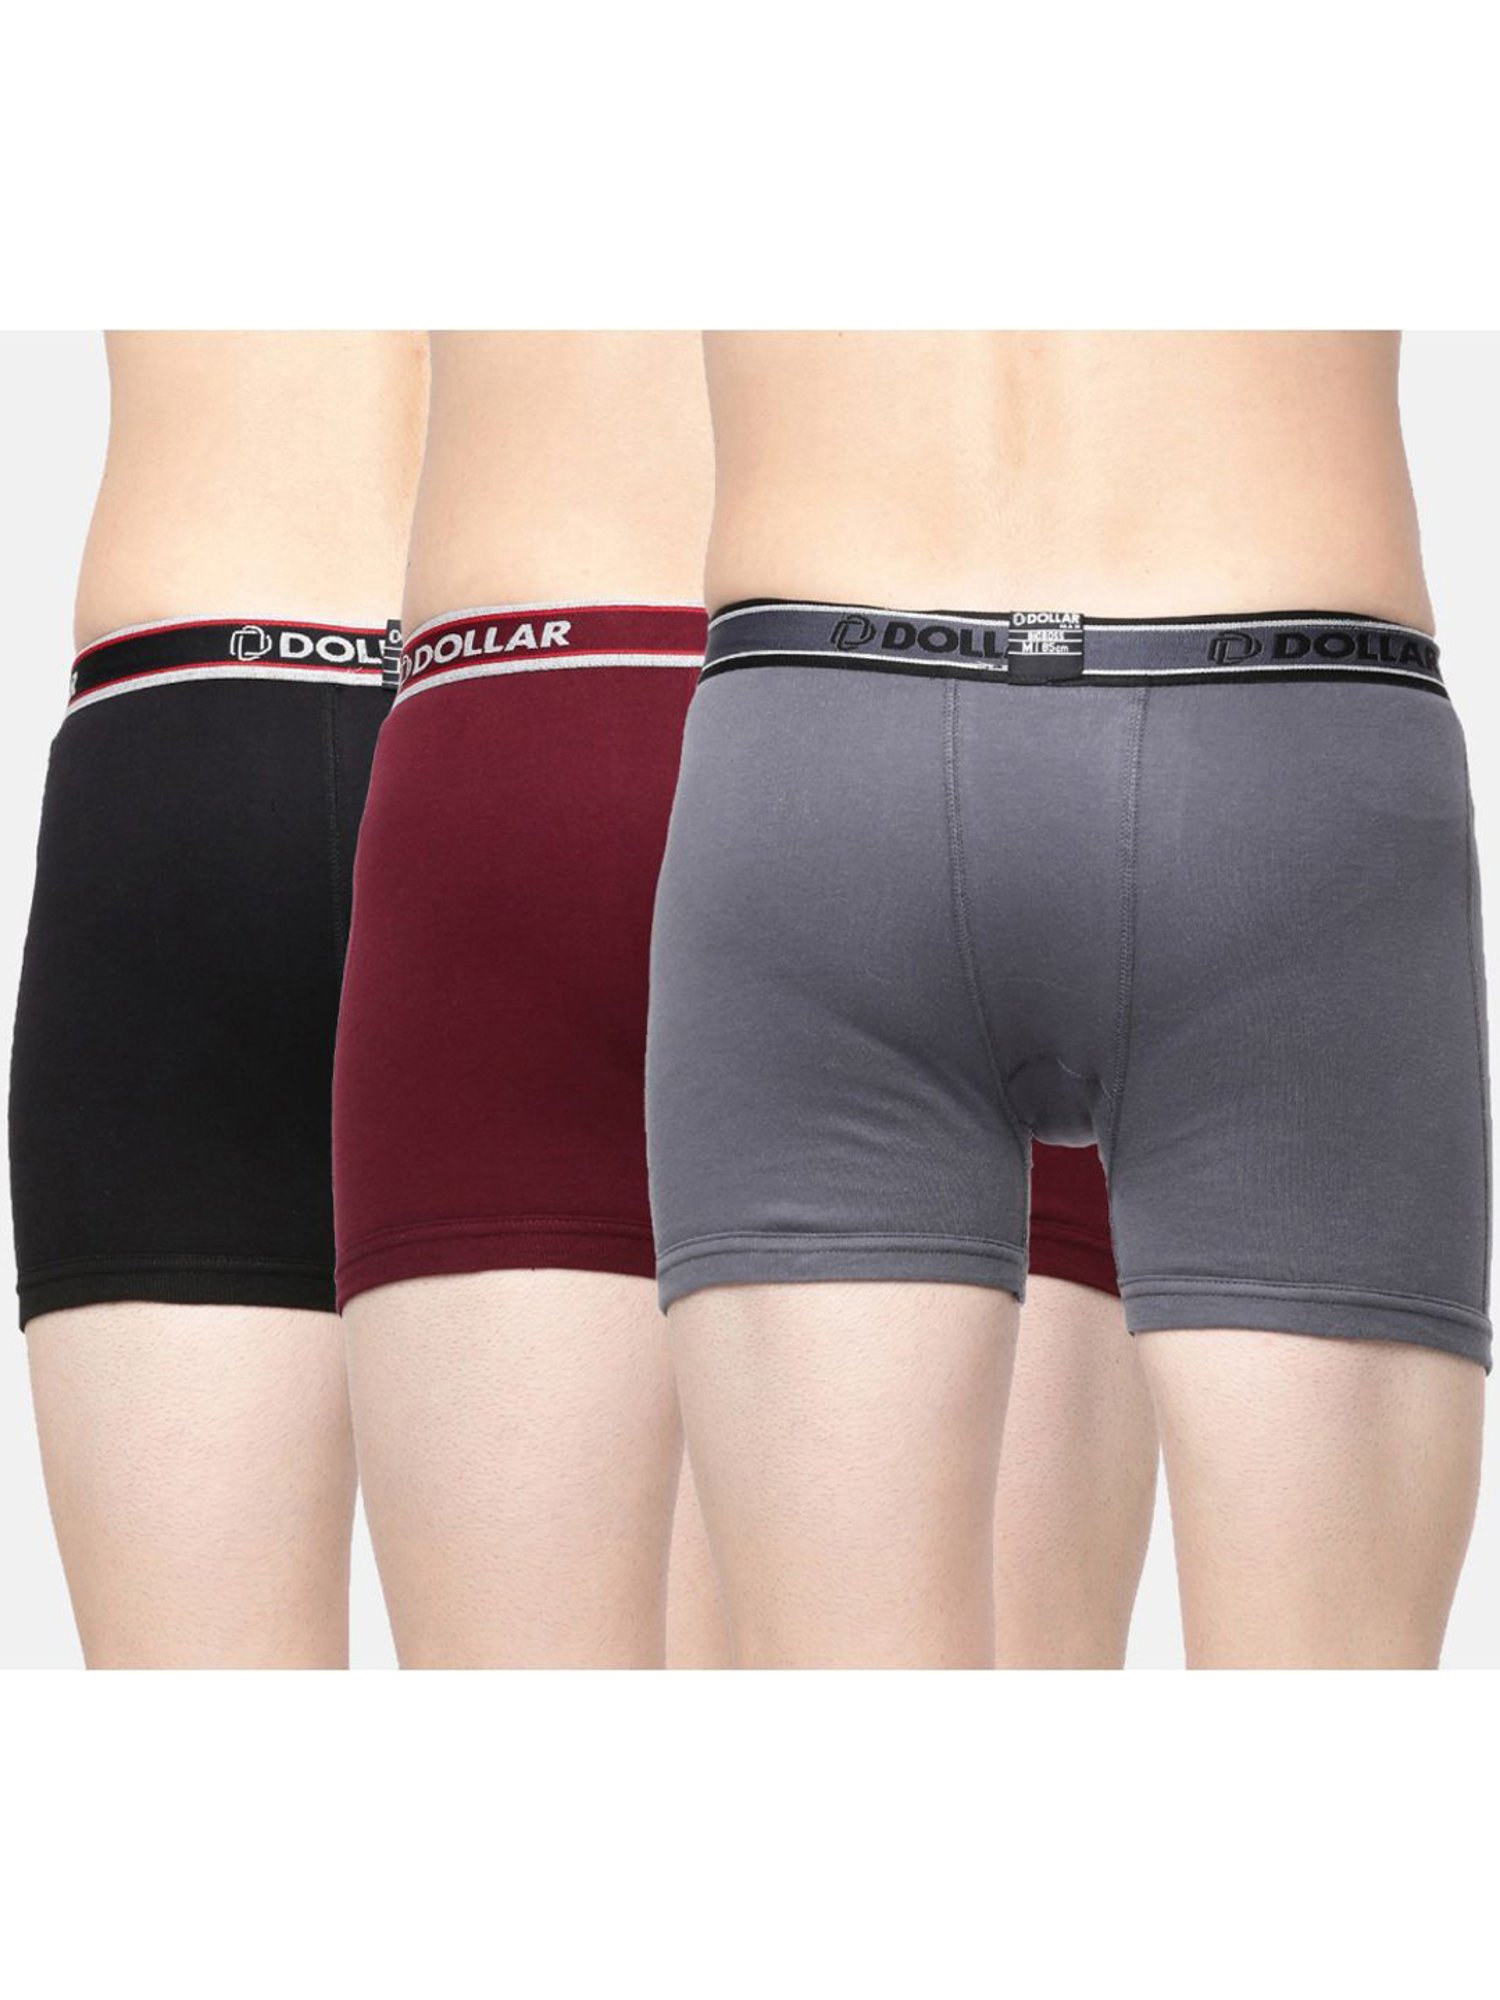 Buy Dollar Bigboss Multicolor Mid Rise Solid Trunks (Pack of 5